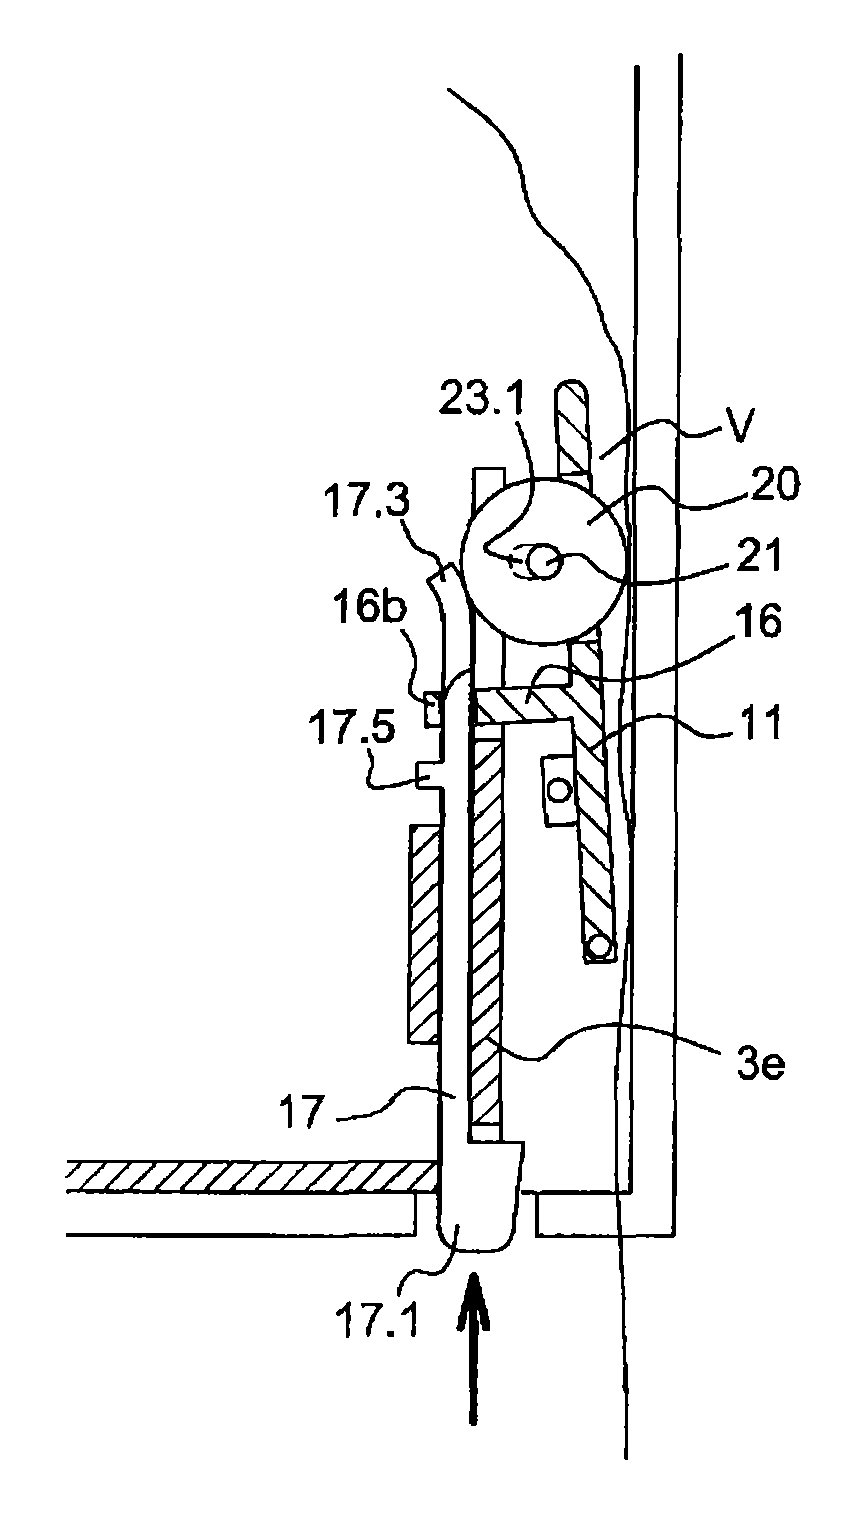 Appliance for distributing a precut wiping material that is rolled up or folded in a Z shape